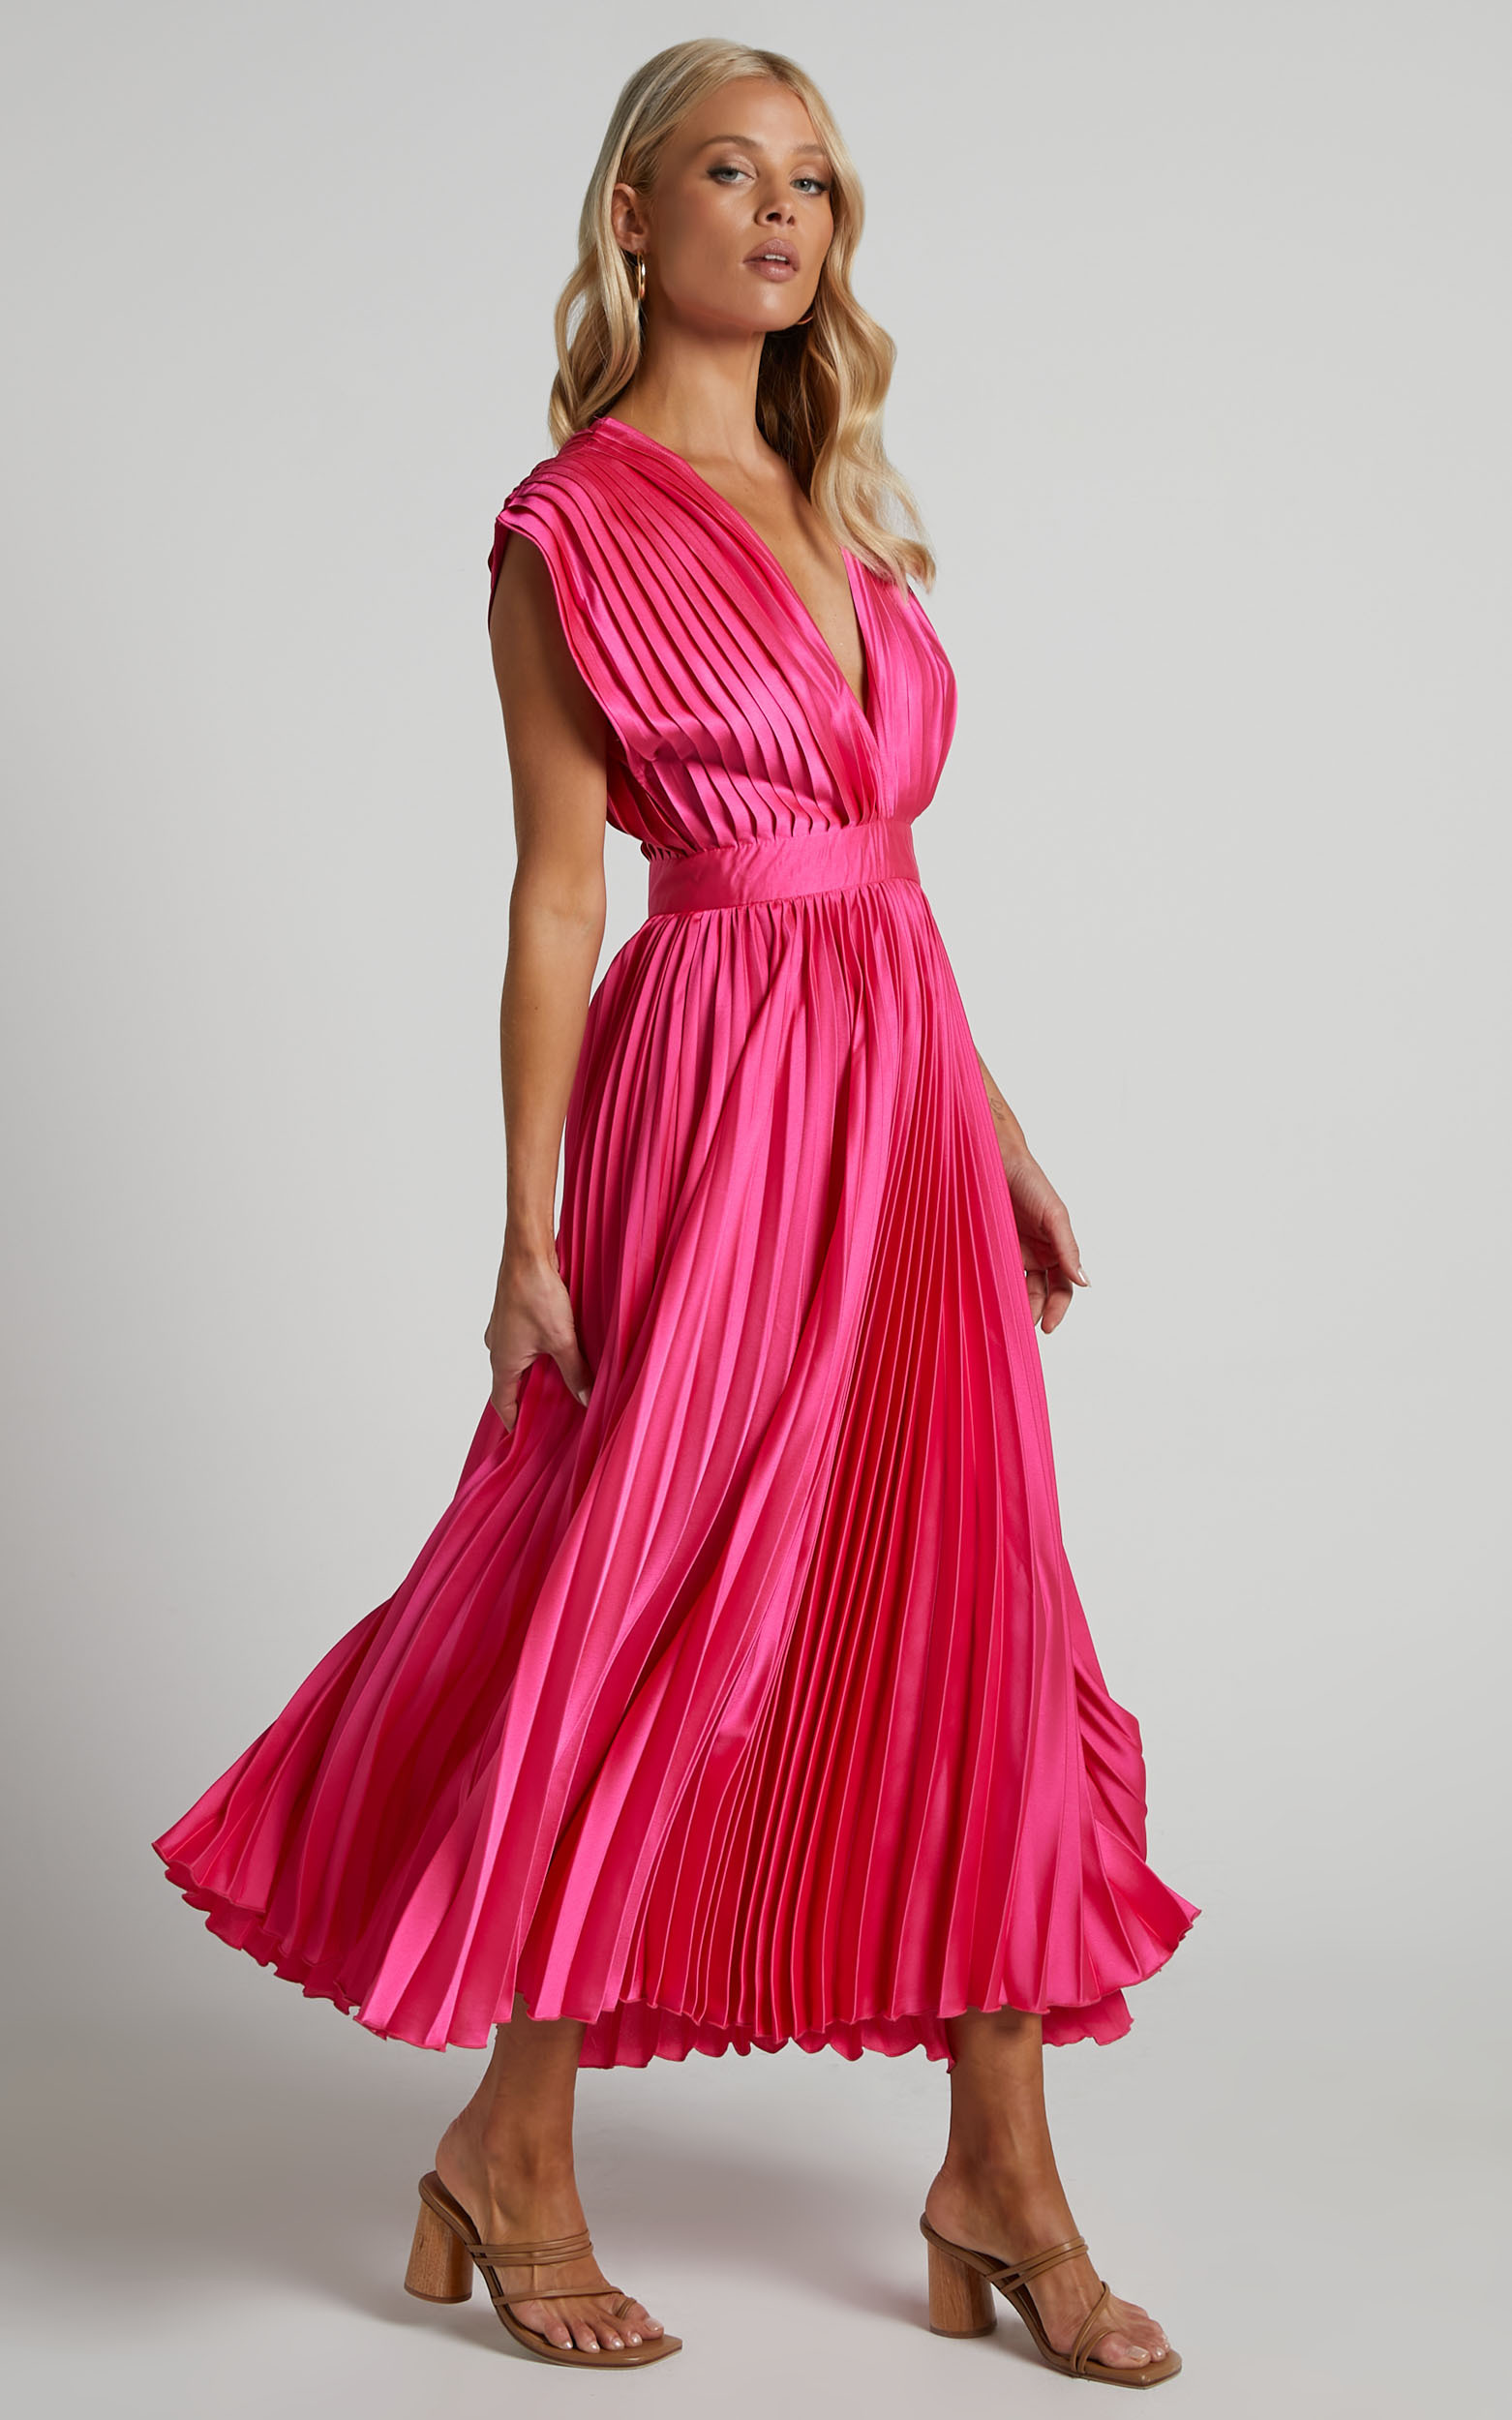 Della Maxi Dress - Plunge Neck Short Sleeve Pleated Dress in Hot Pink - 06, PNK2, hi-res image number null